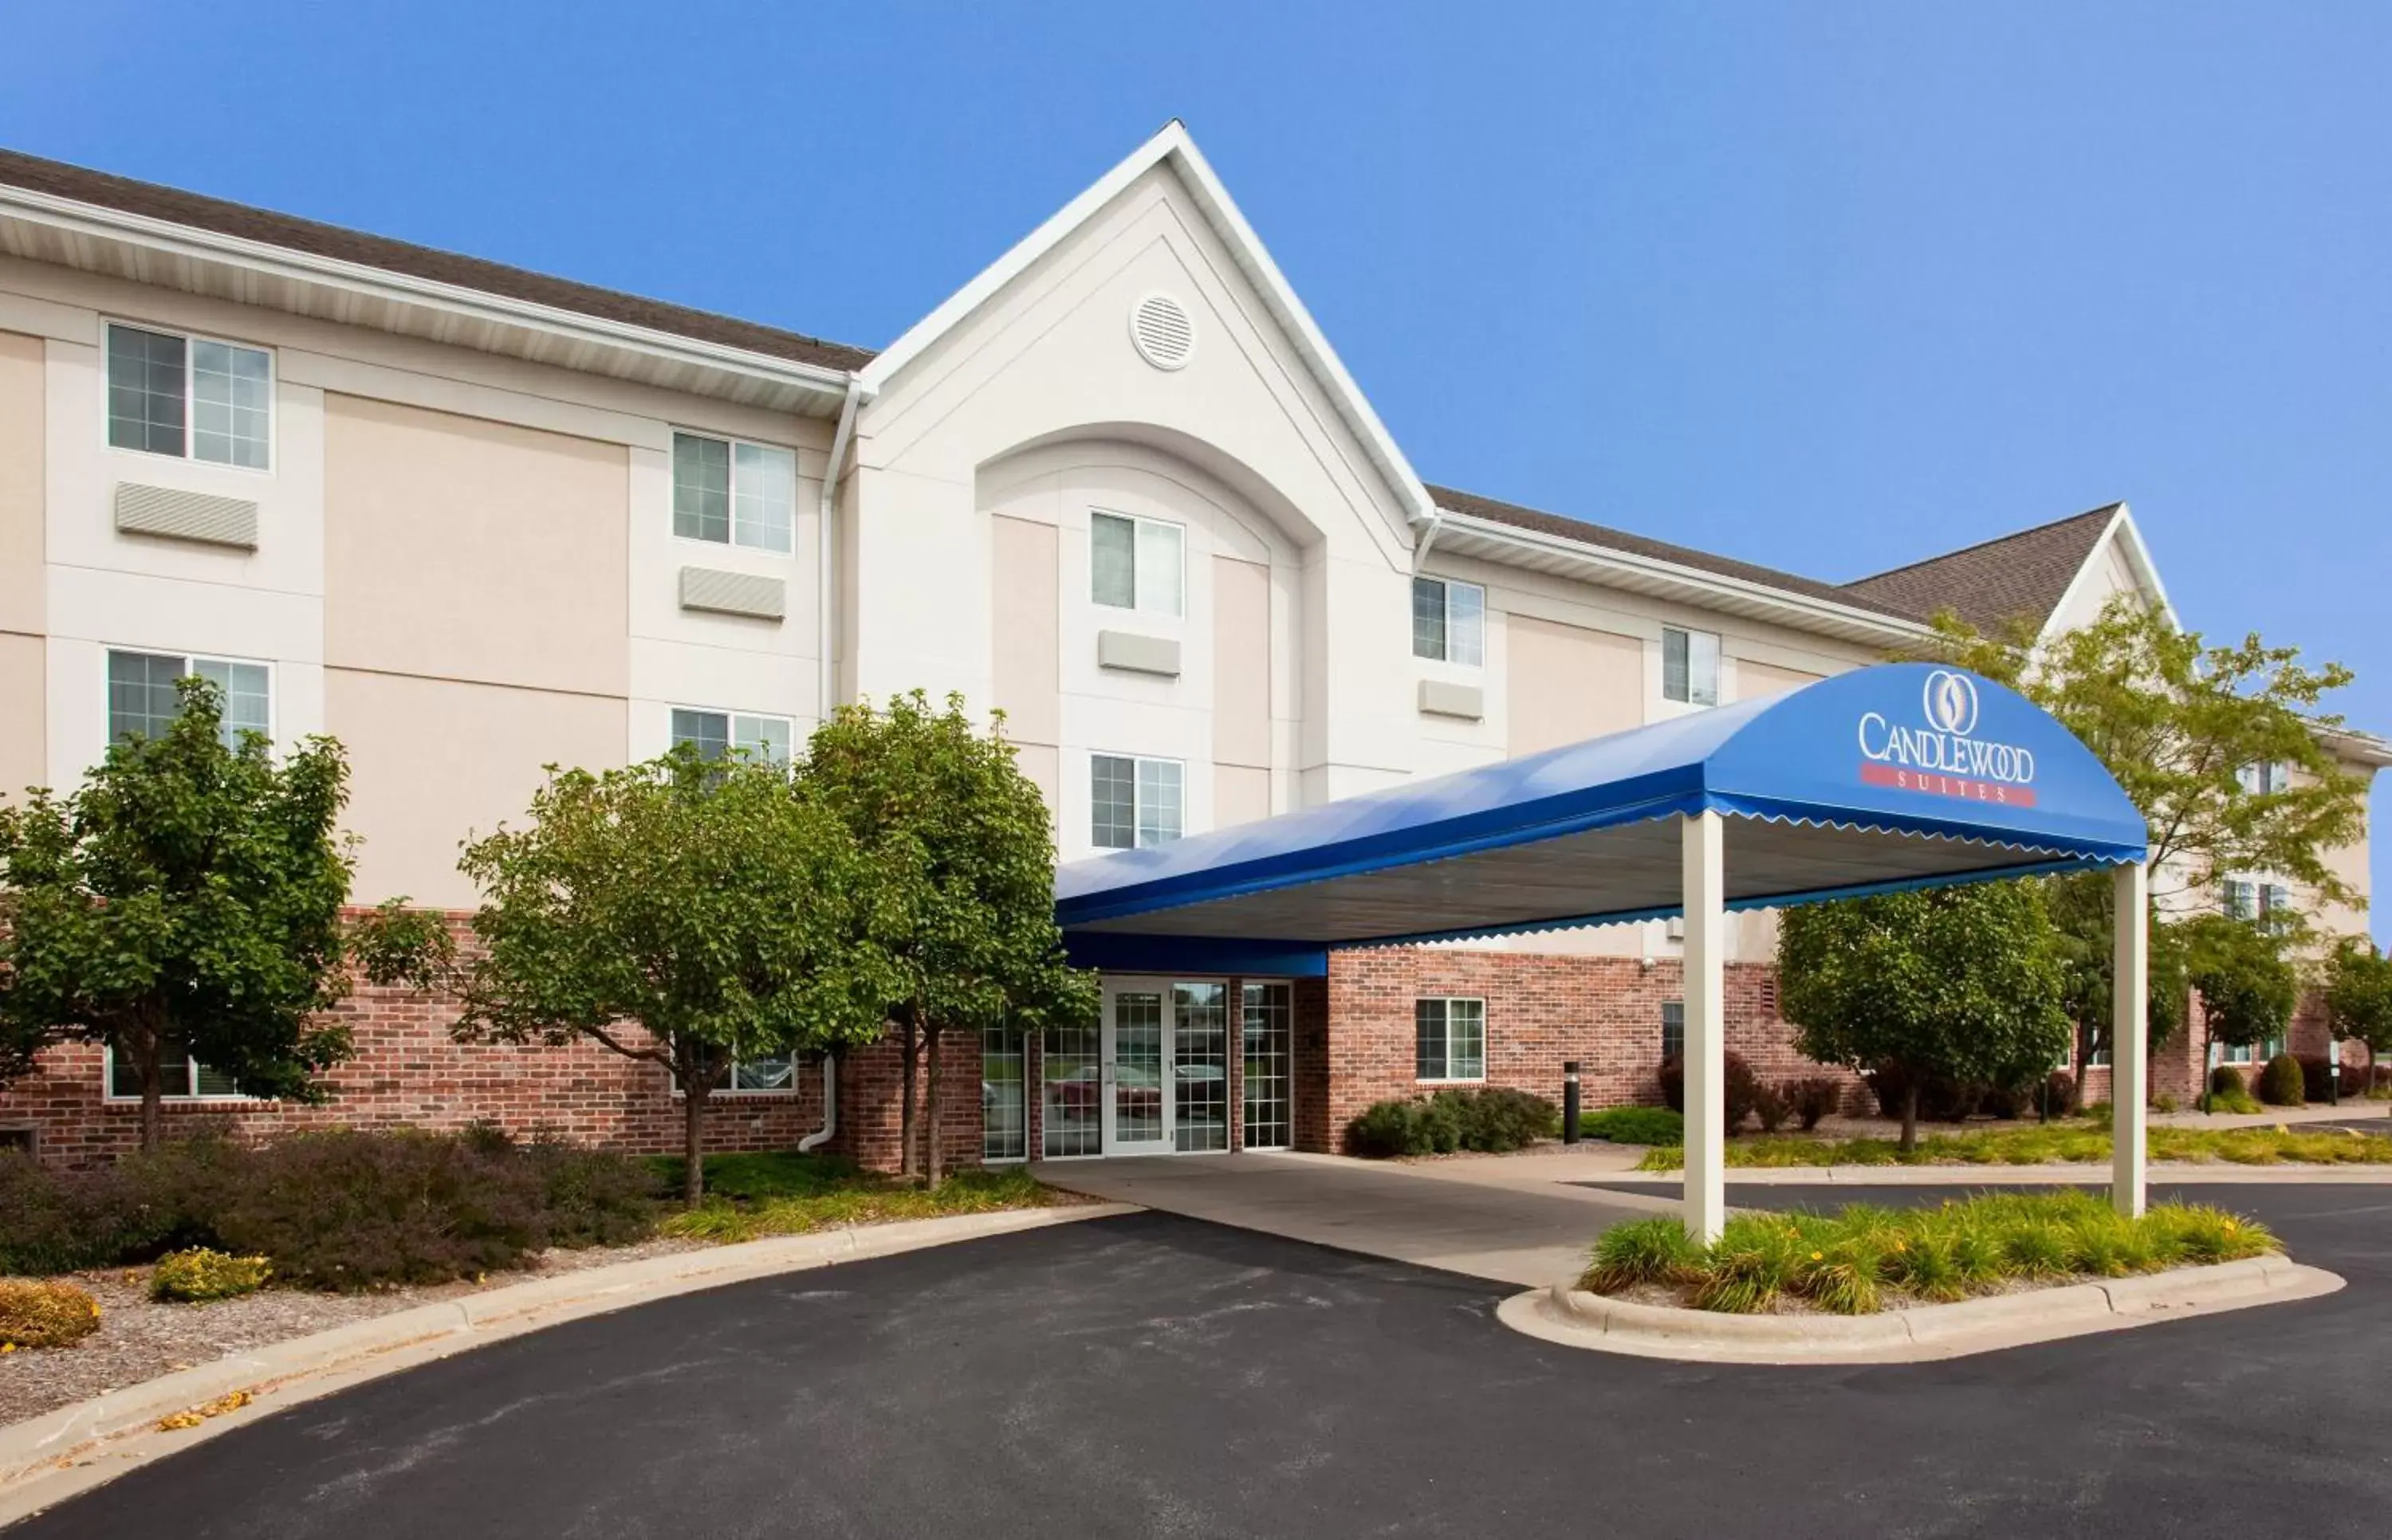 Property building in Candlewood Suites Appleton, an IHG Hotel